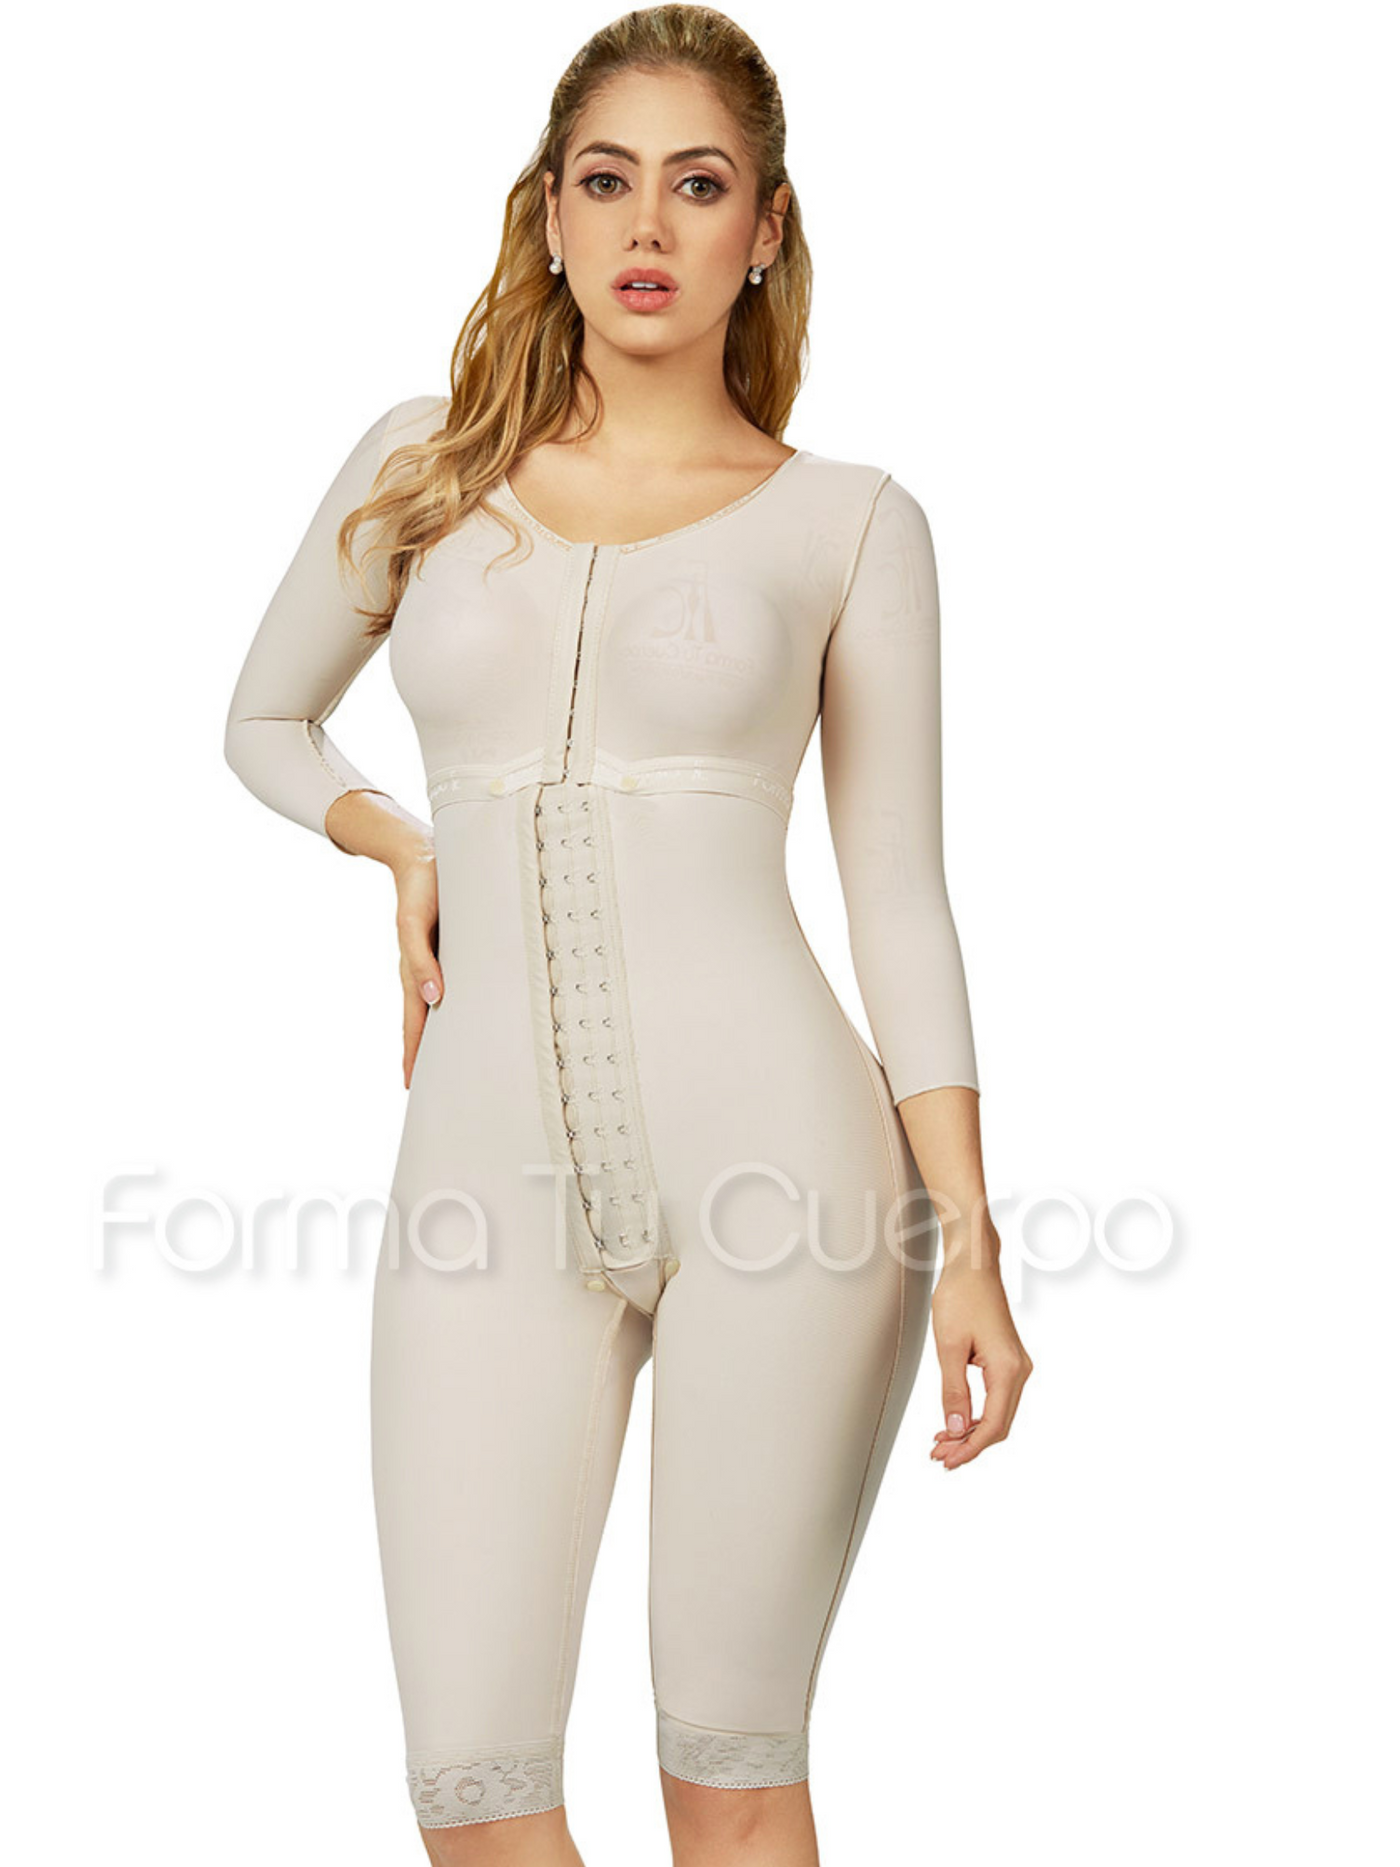 The Perfect and Proper Garments after a Tummy Tuck - Bonito & Co.